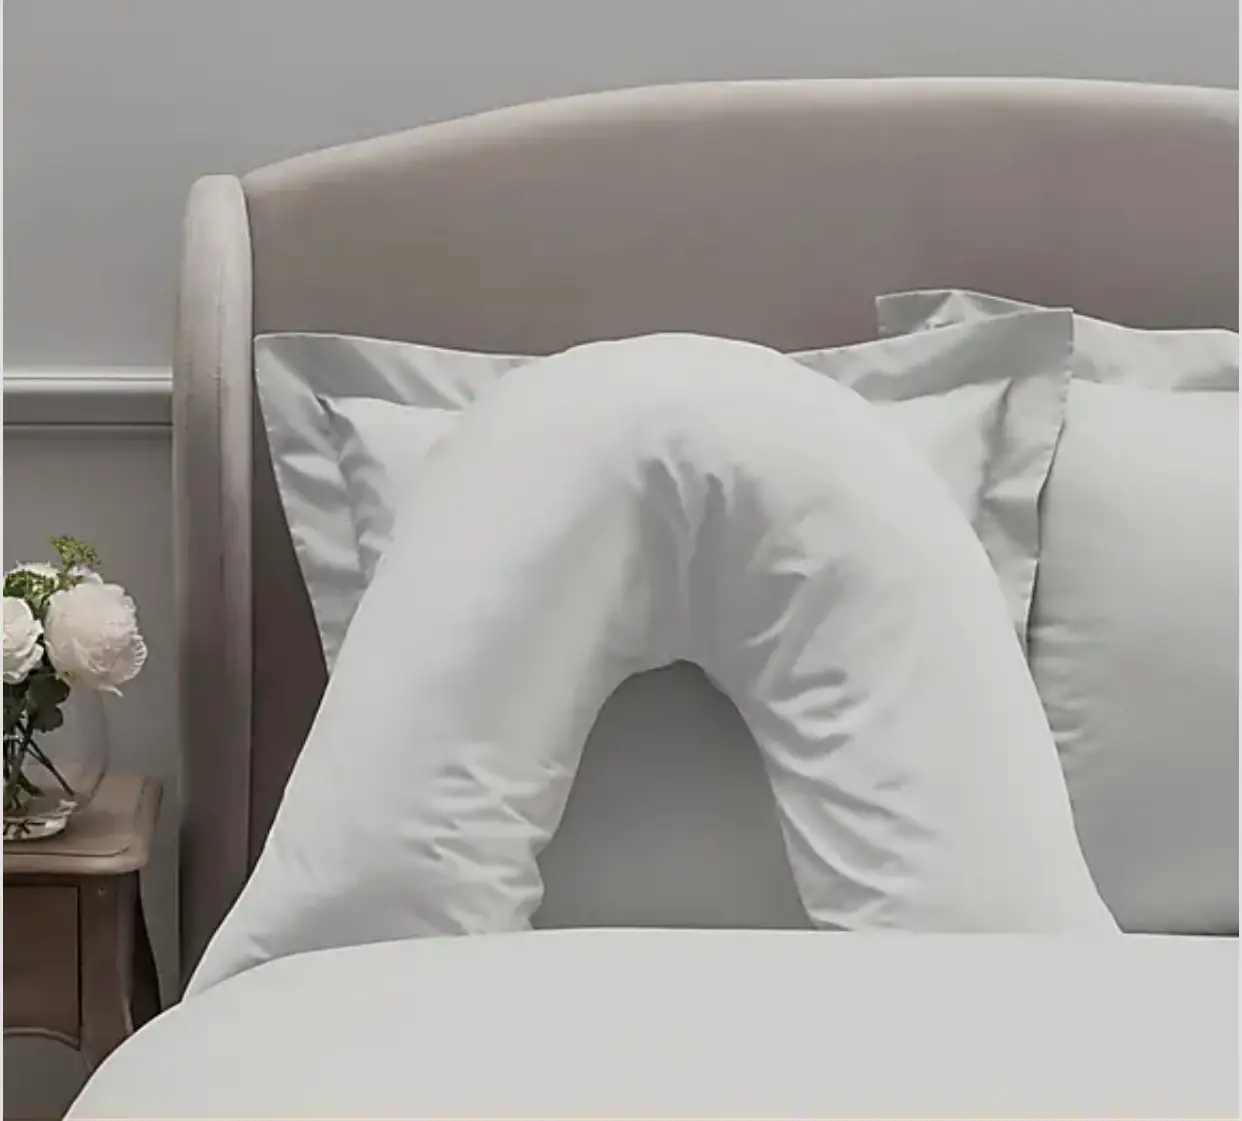 HOW TO CHOOSE THE RIGHT PILLOWS FOR YOUR BED